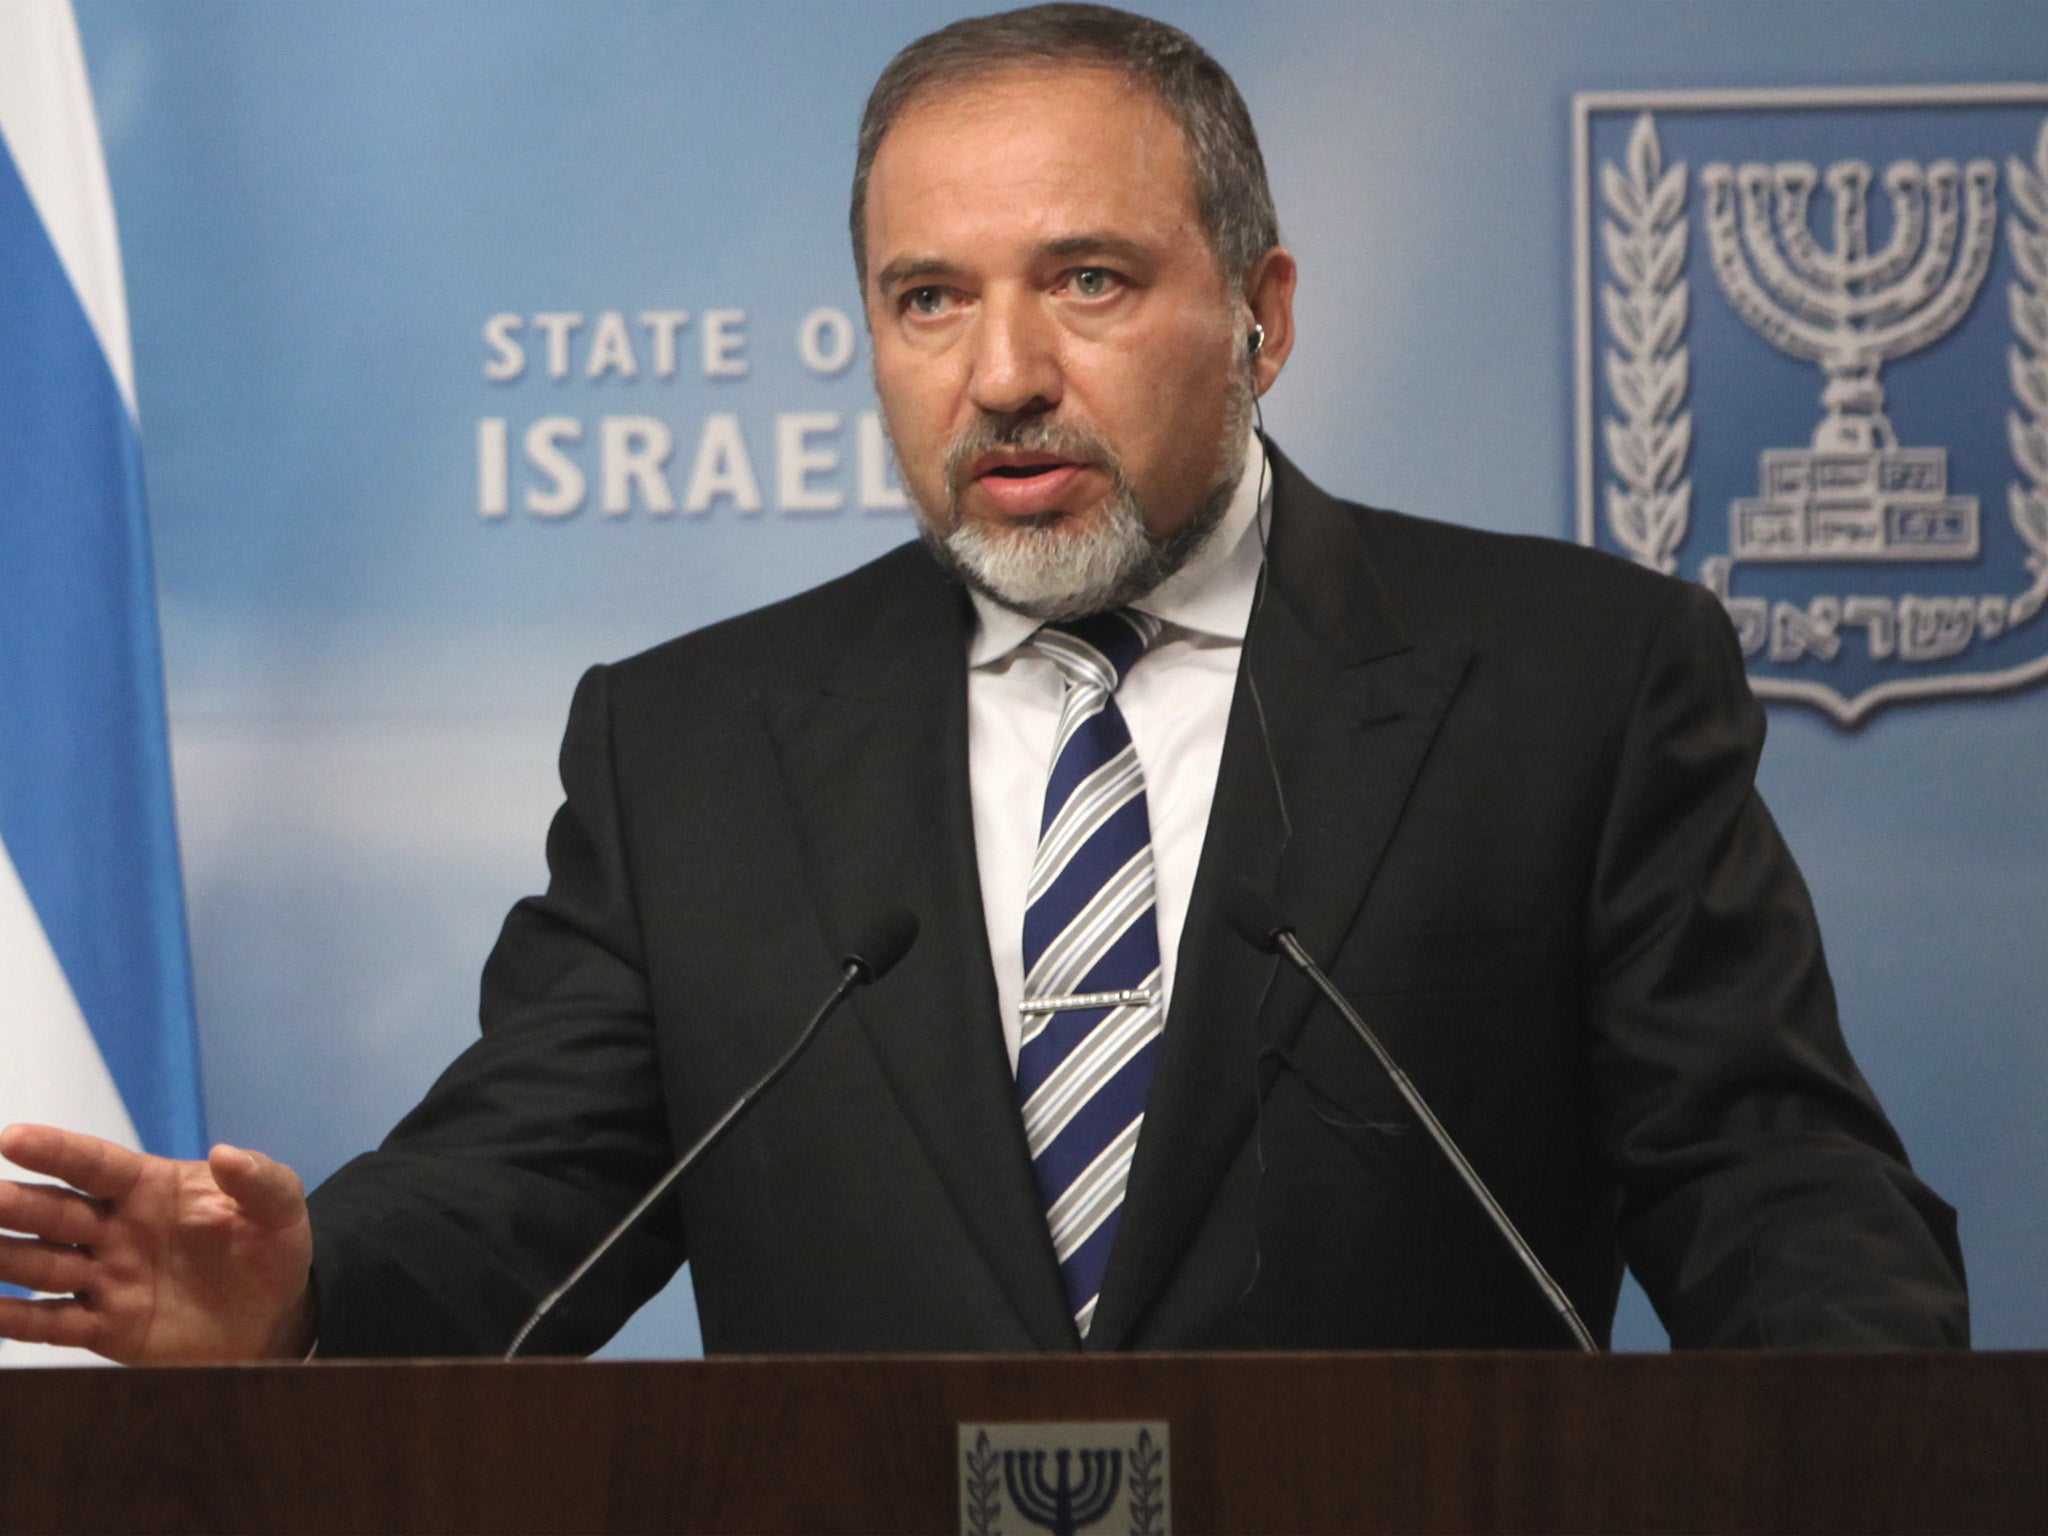 Avigdor Lieberman is the leader of the right wing party, Yisrael Beiteinu